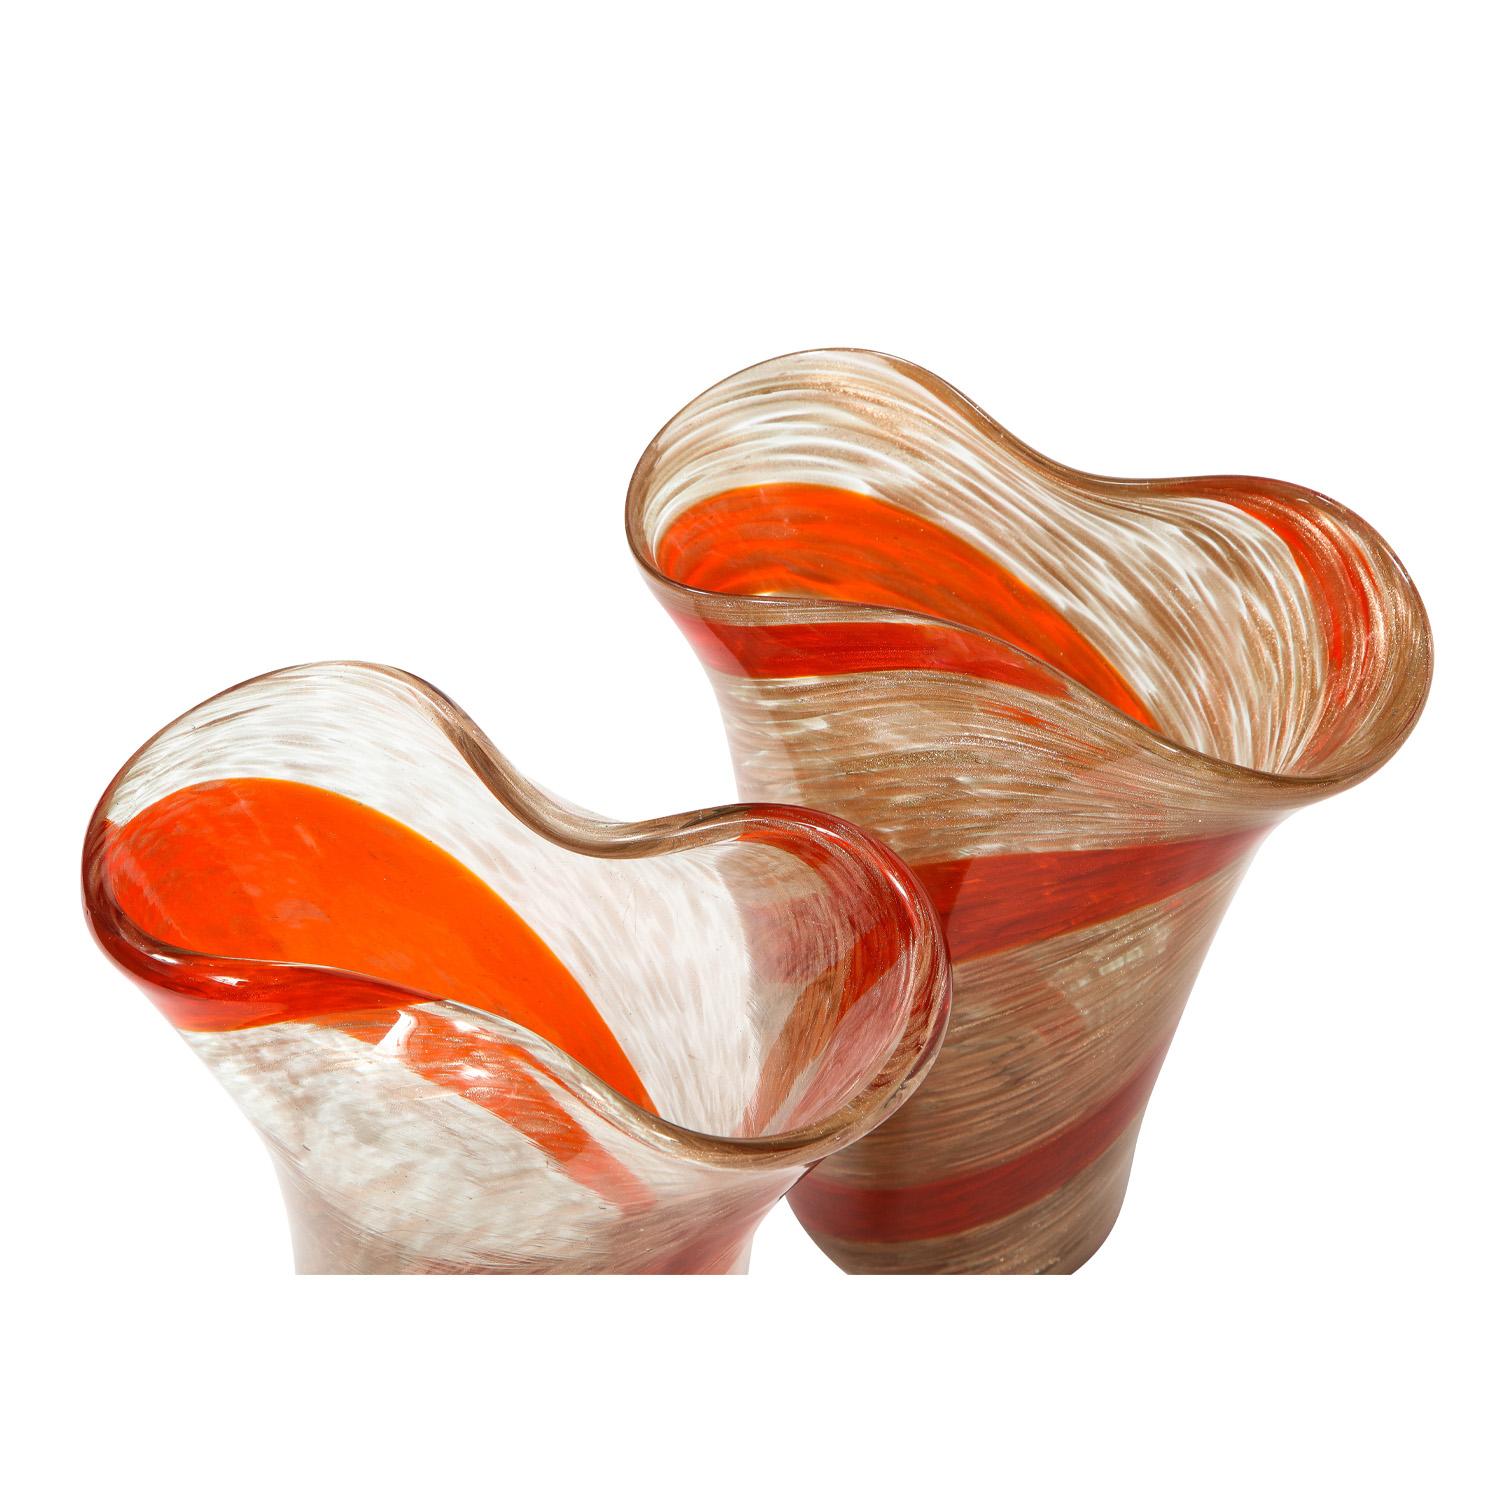 Mid-20th Century Fratelli Toso Pair of Pinched-Top Glass Vases with Red Spiral, 1950s For Sale